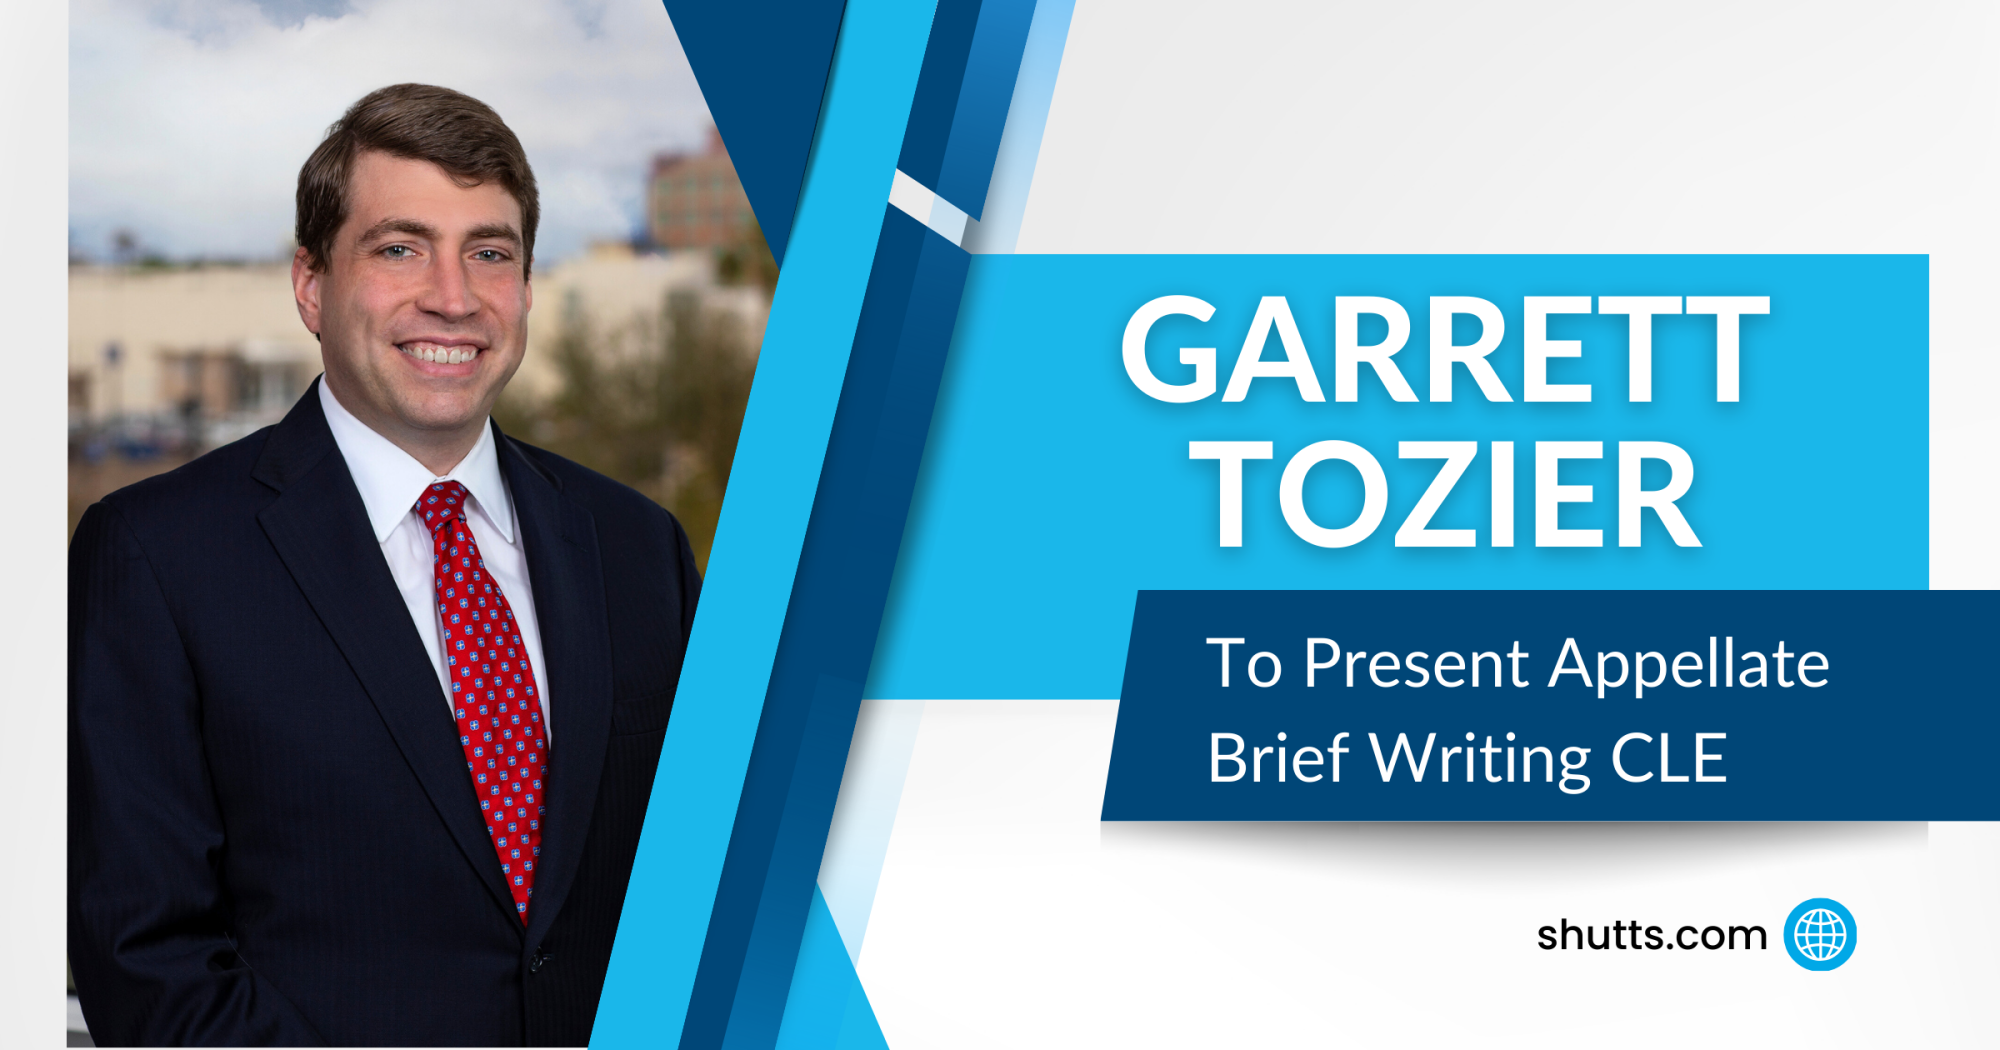 Garrett Tozier to Present Appellate Brief Writing CLE